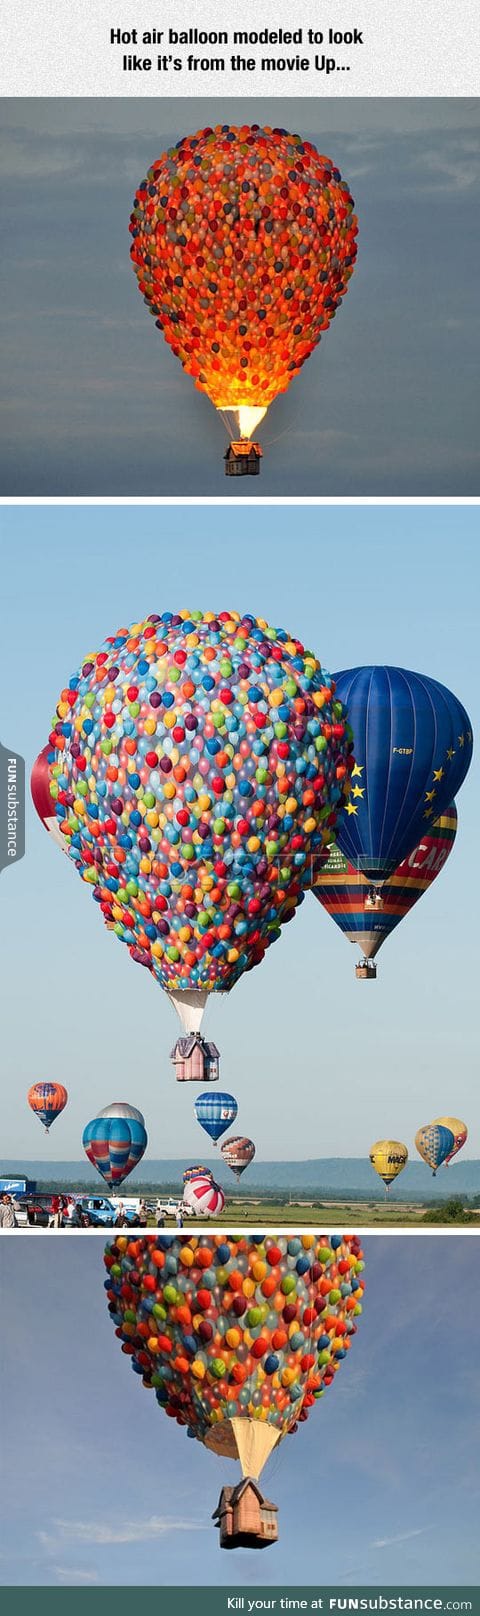 Up hot air balloon in real life